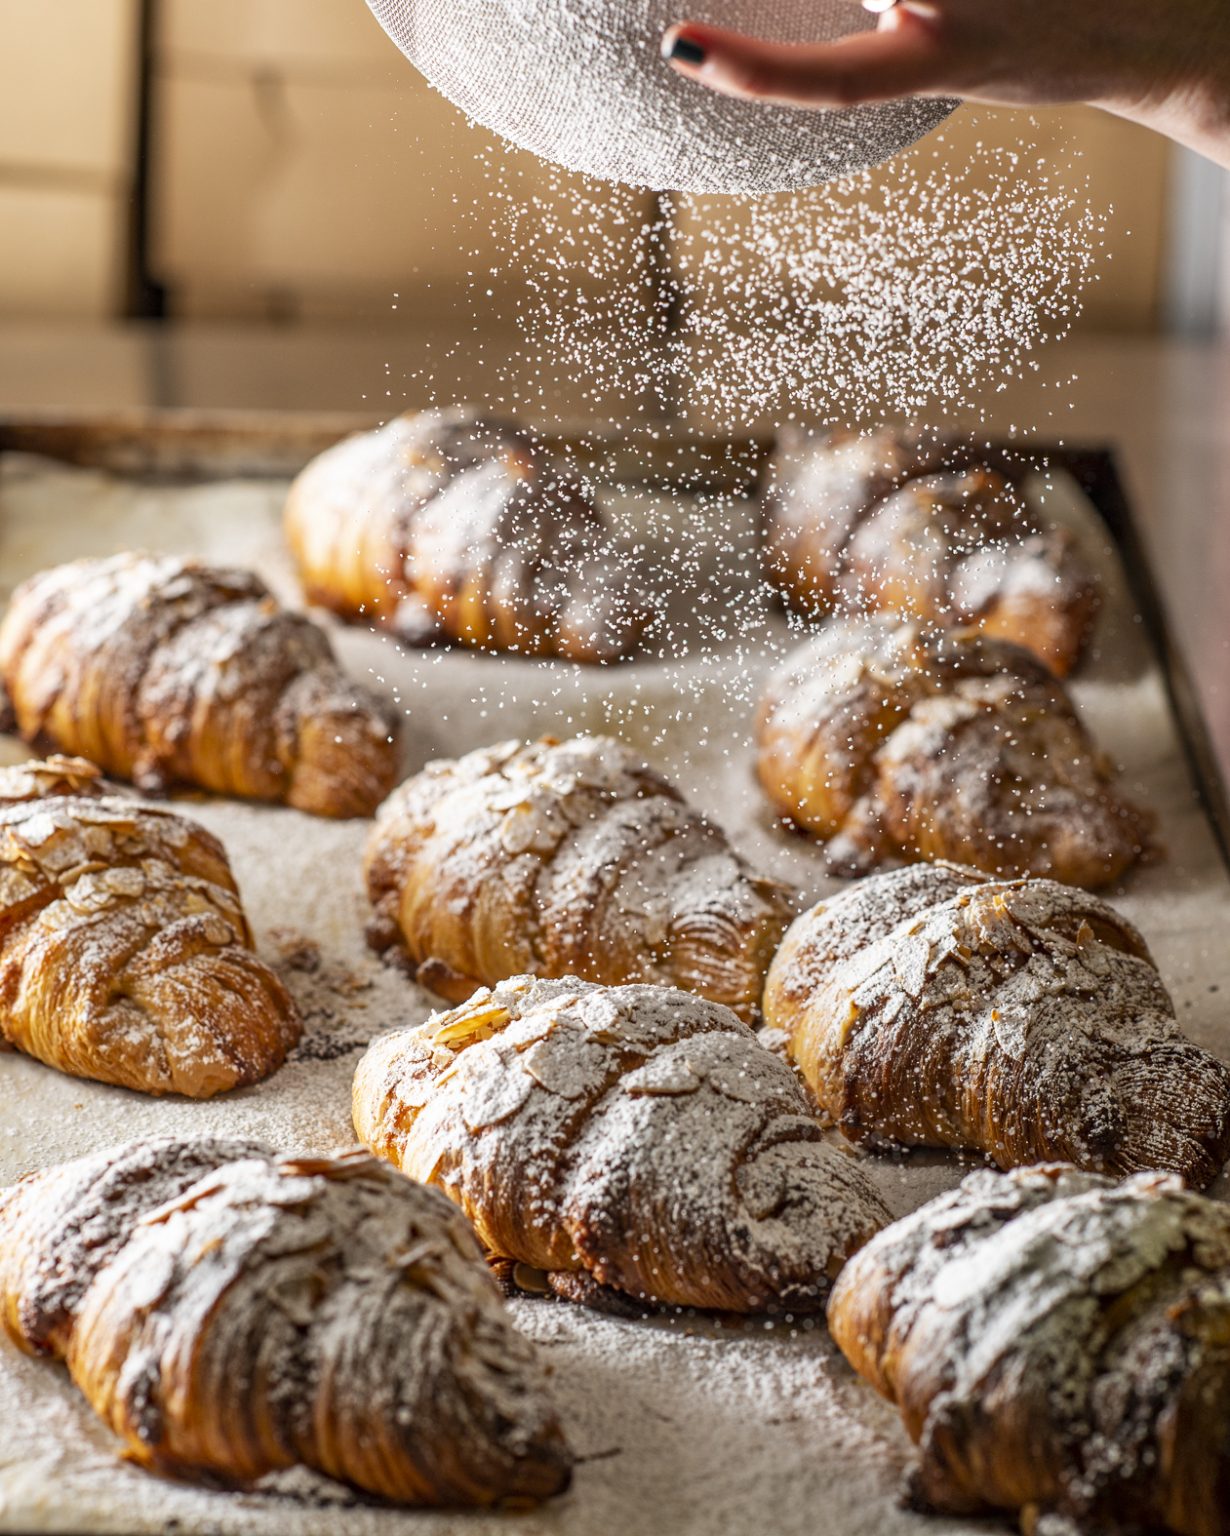 Scrumptious almond croissant on a wooden board, showcasing its flaky layers and almond filling